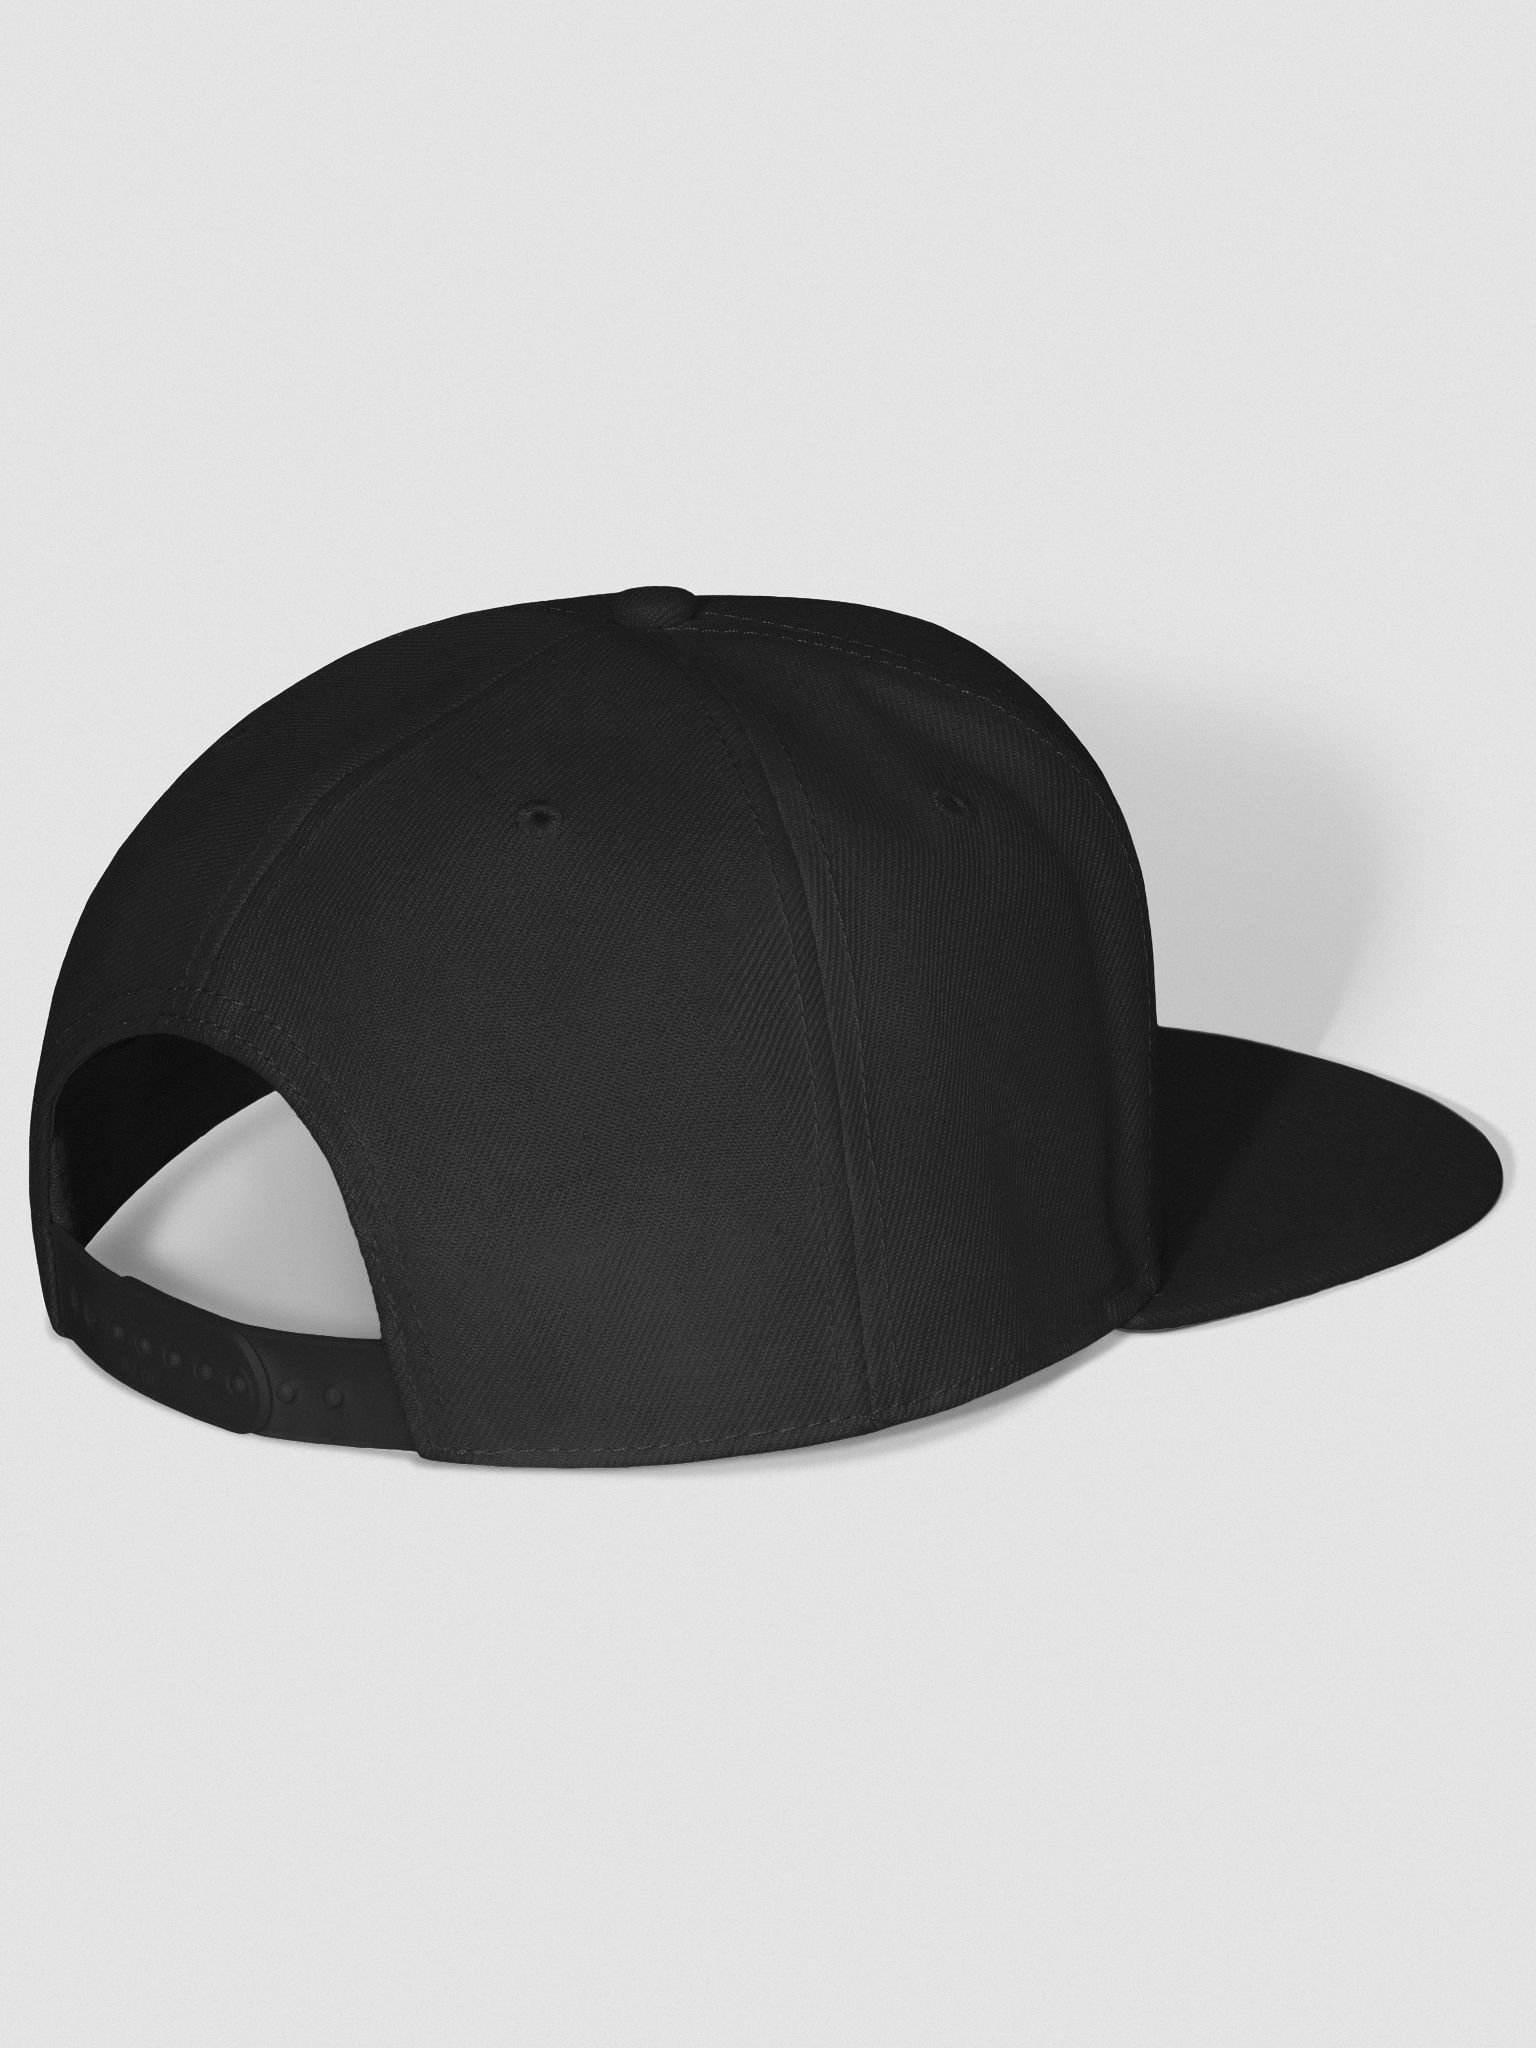 Blacked Out Vergecast Hat | The Verge